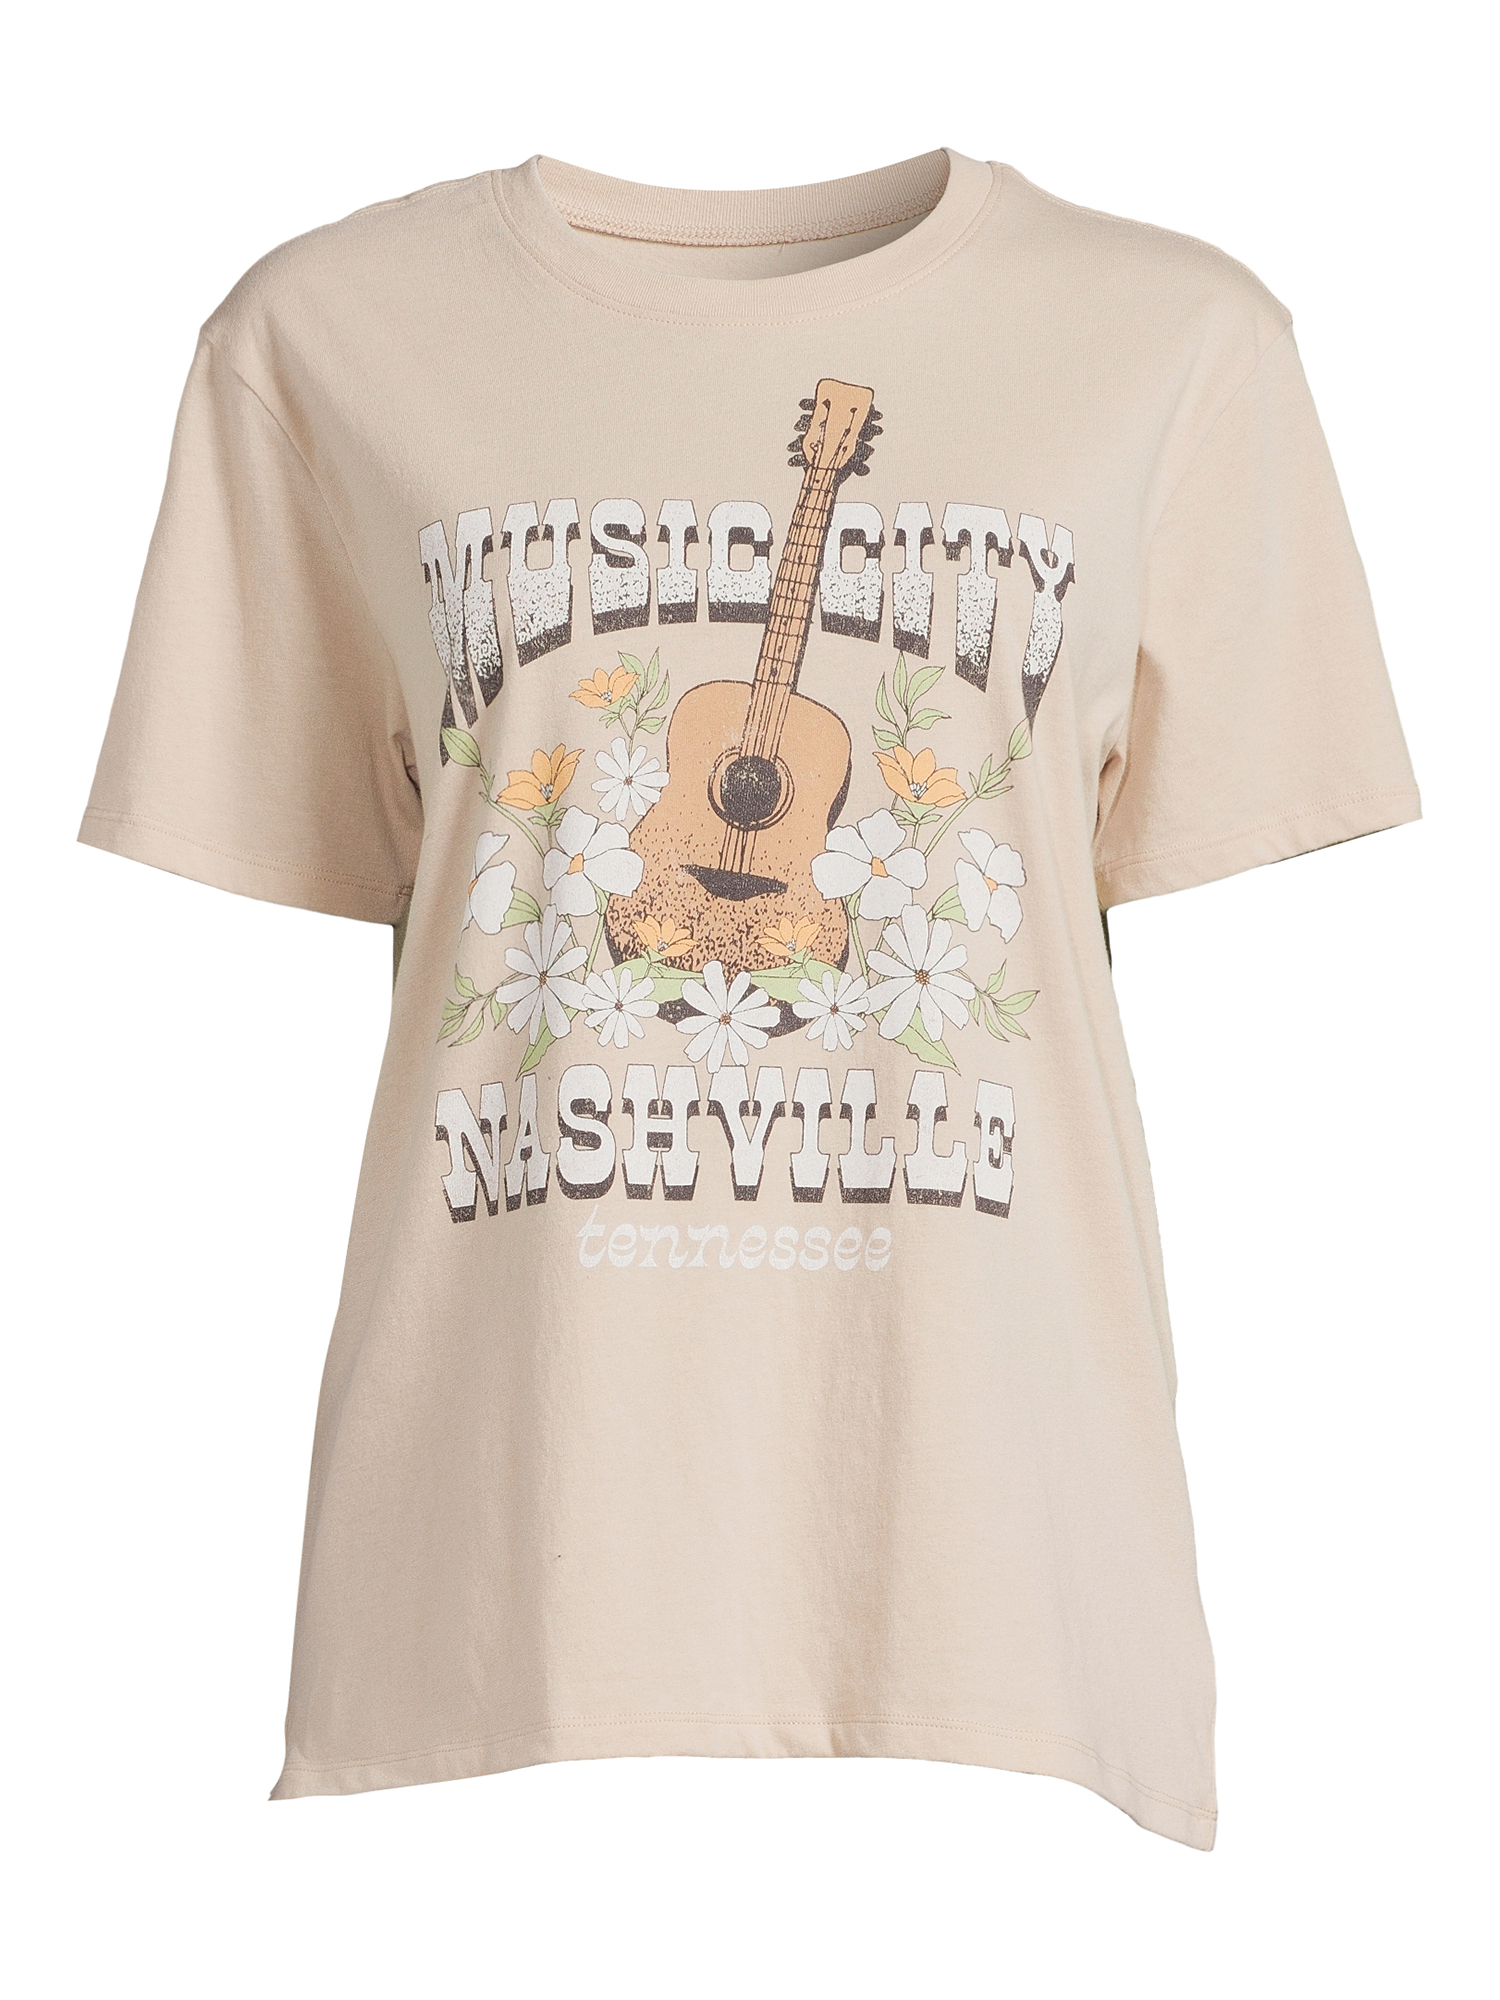 Time and Tru Women's Short Sleeve Destination Graphic Tee - image 2 of 5